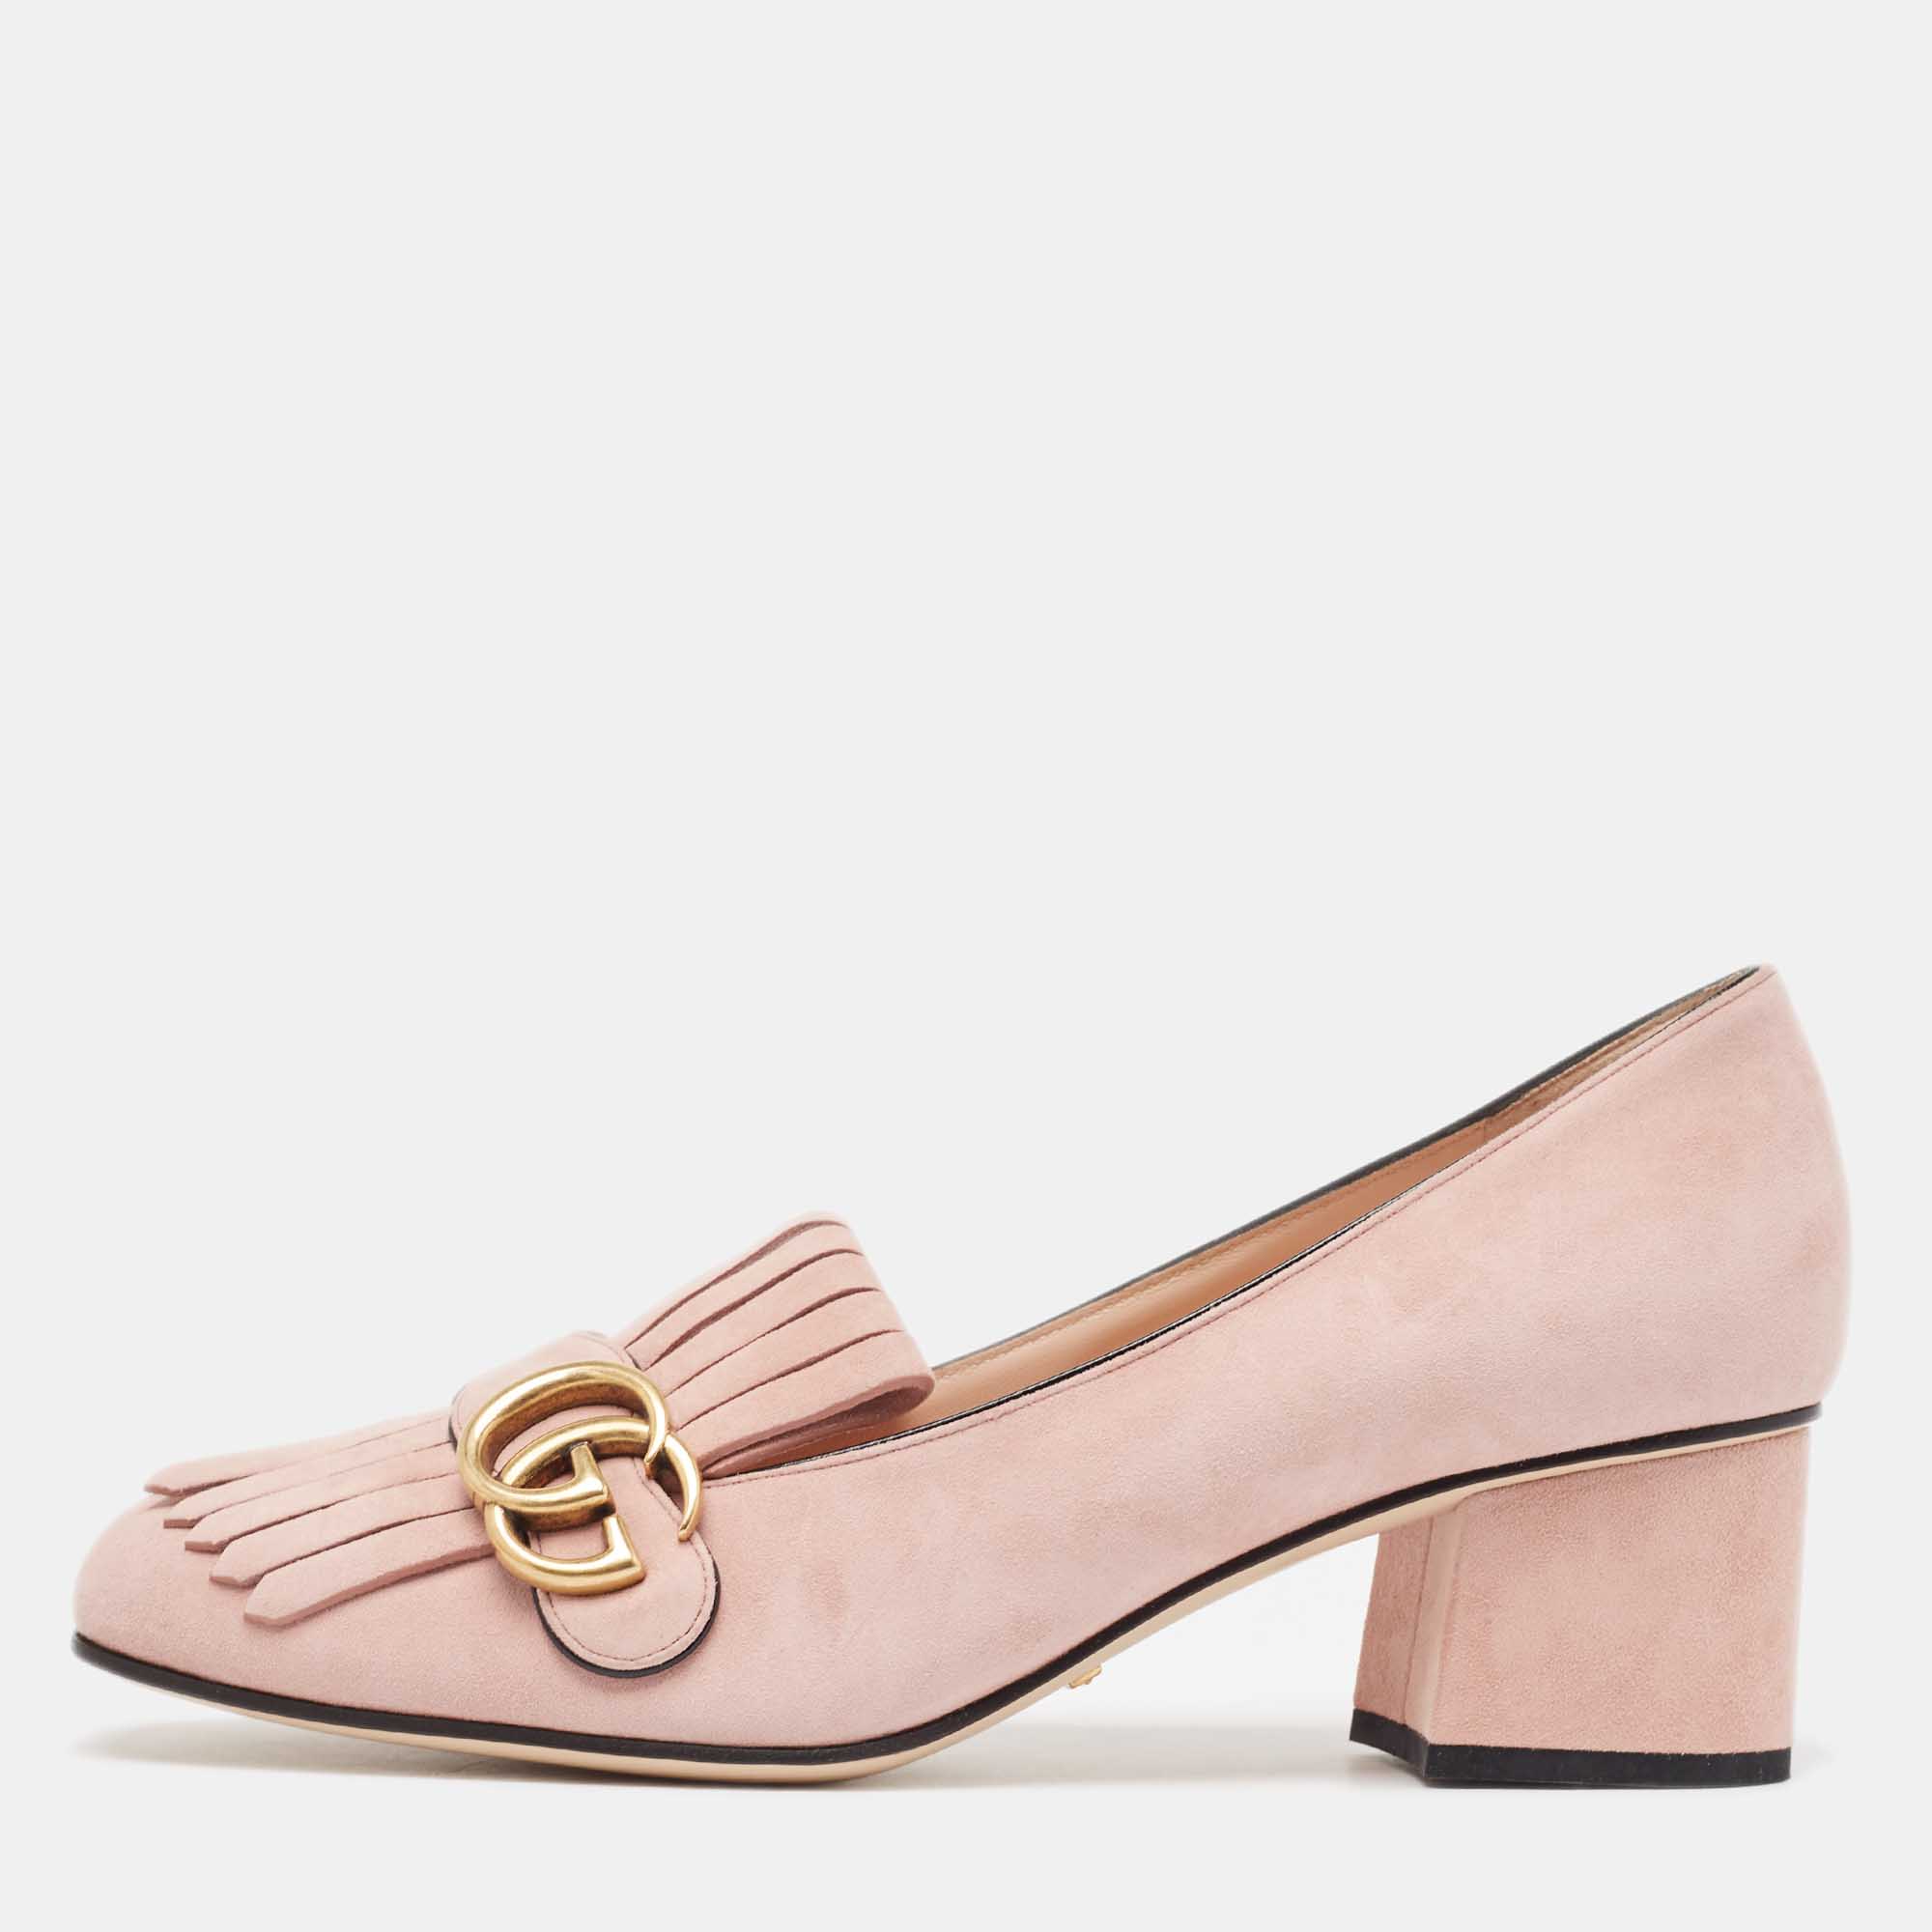 Gucci pink suede double g block heel pumps size 39.5